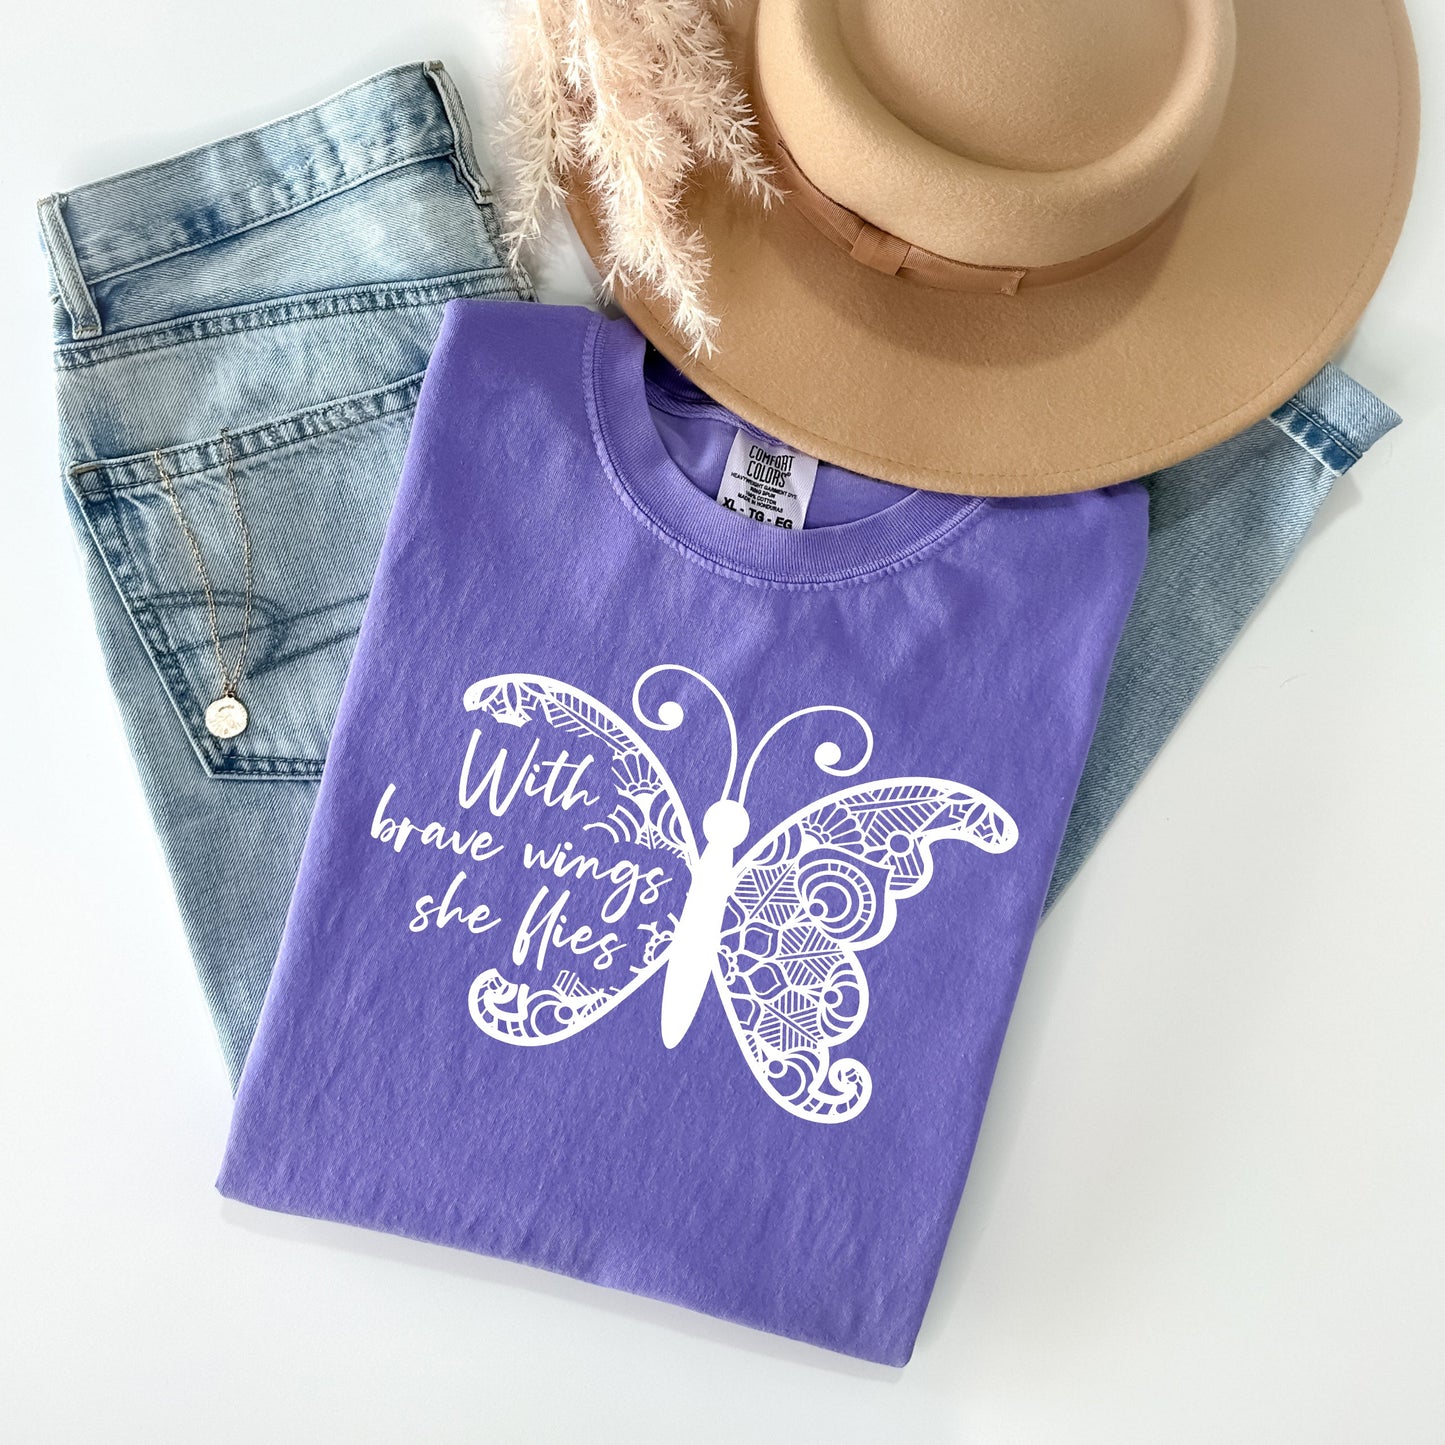 With Brave Wings She Flies - Comfort Colors Graphic Tee